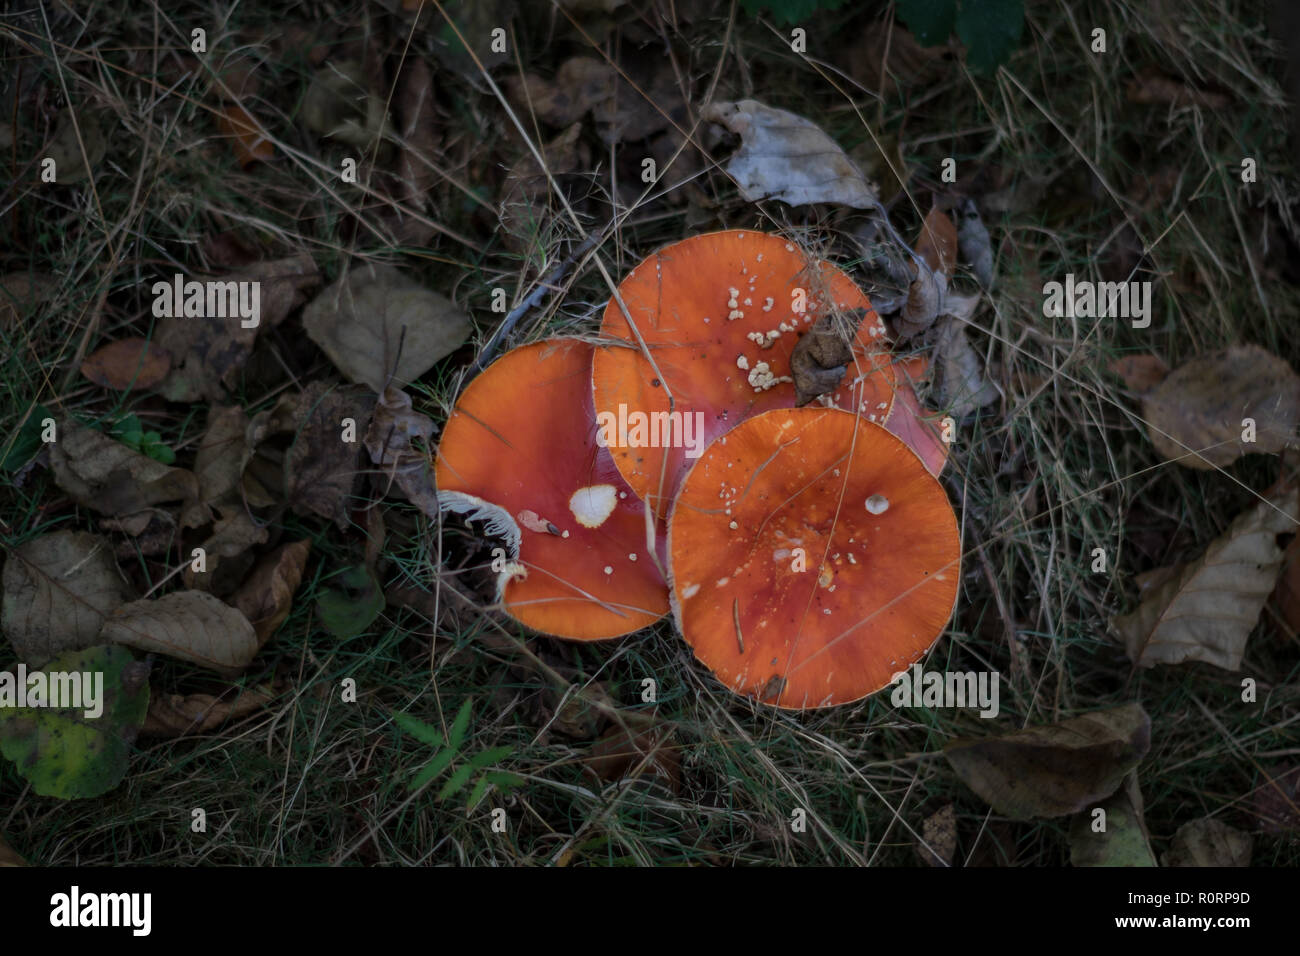 Mushrooms in forest Stock Photo